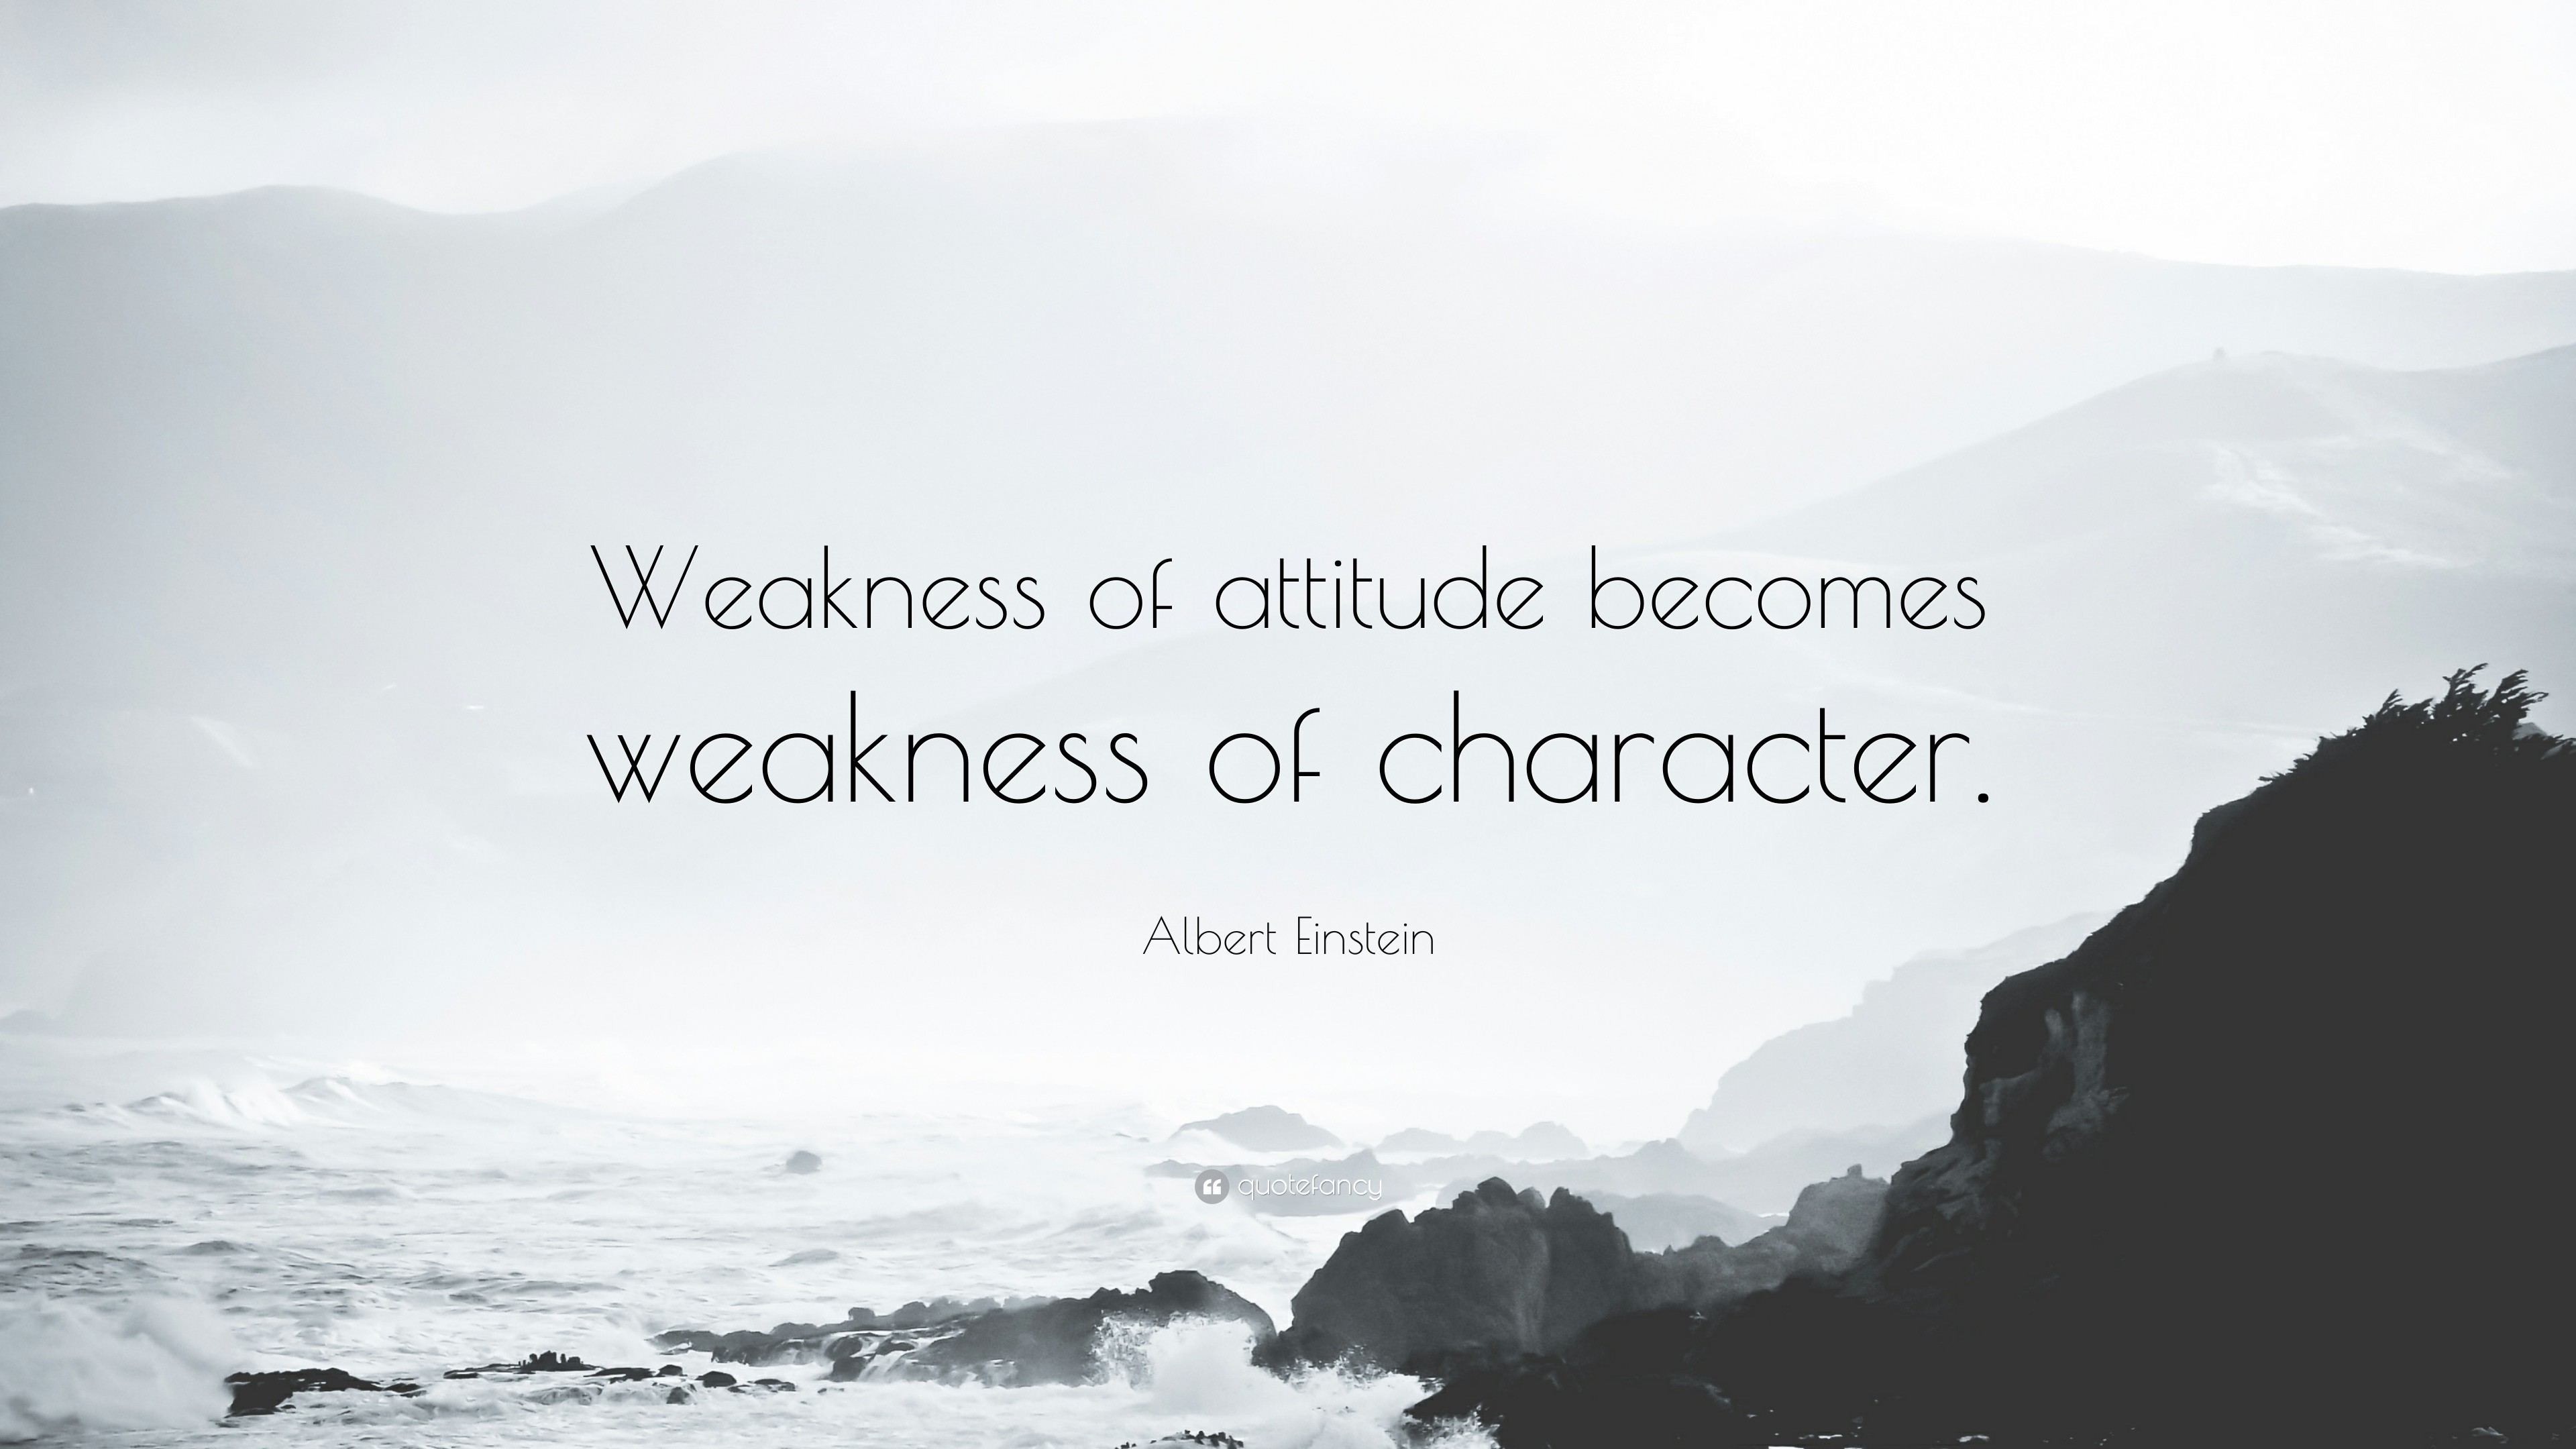 3840x2160 Attitude Quotes: “Weakness of attitude becomes weakness of character.” —  Albert Einstein